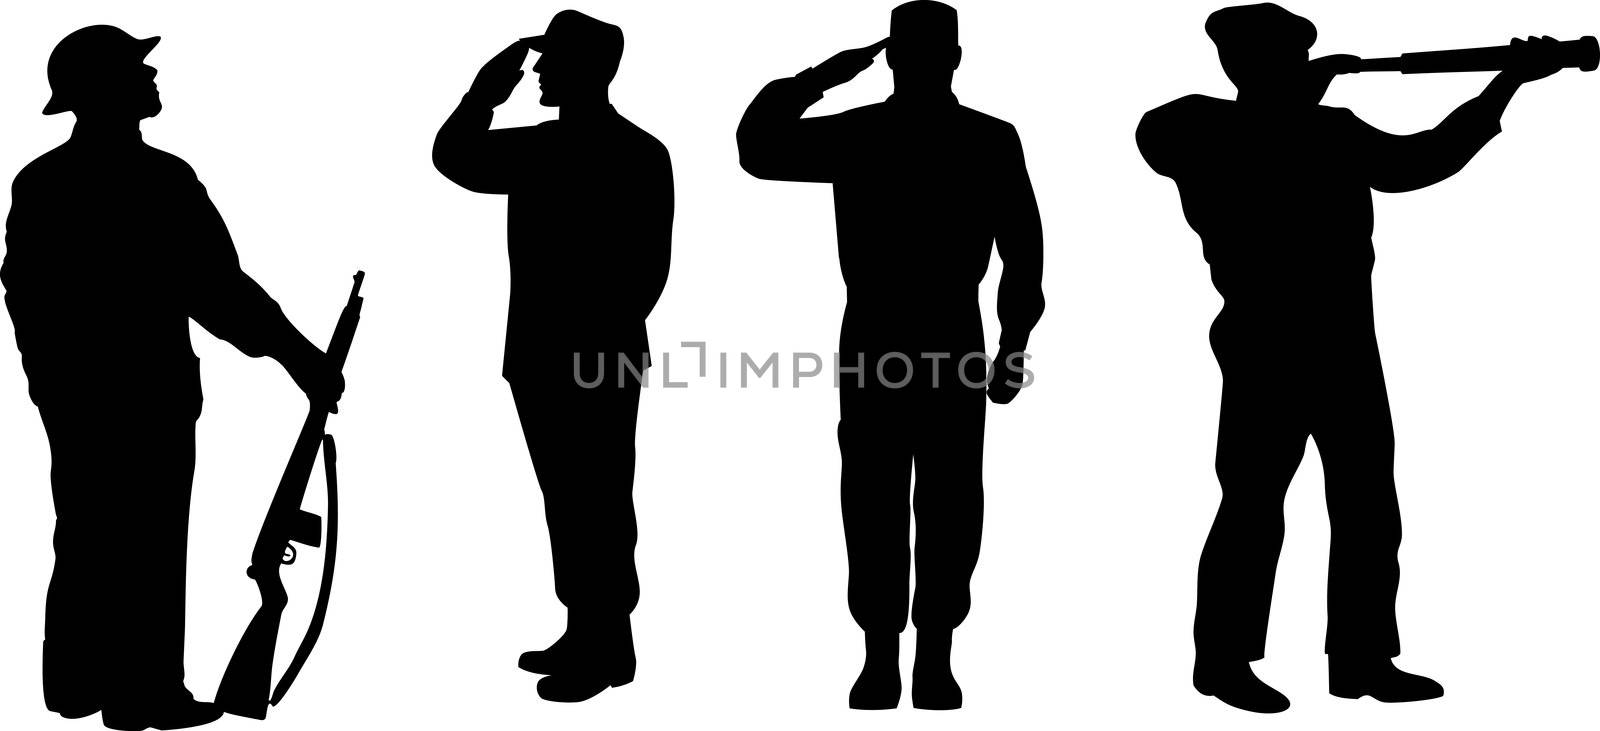 illustration of a silhouette of a soldier saluting, standing attention and looking at telescope on white background